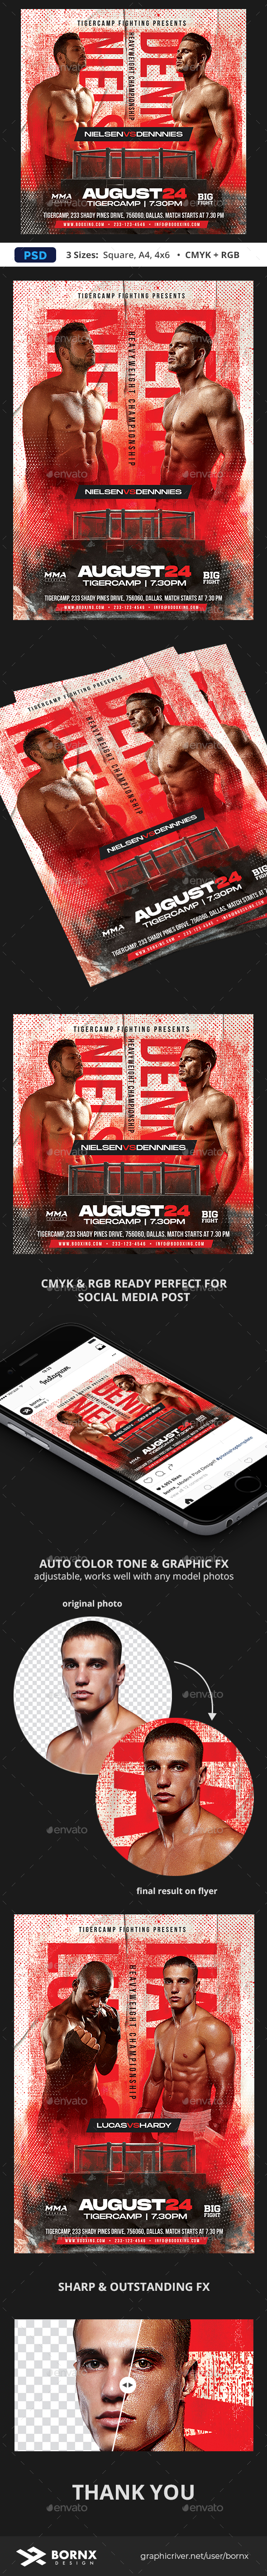 [DOWNLOAD]MMA Boxing Flyer